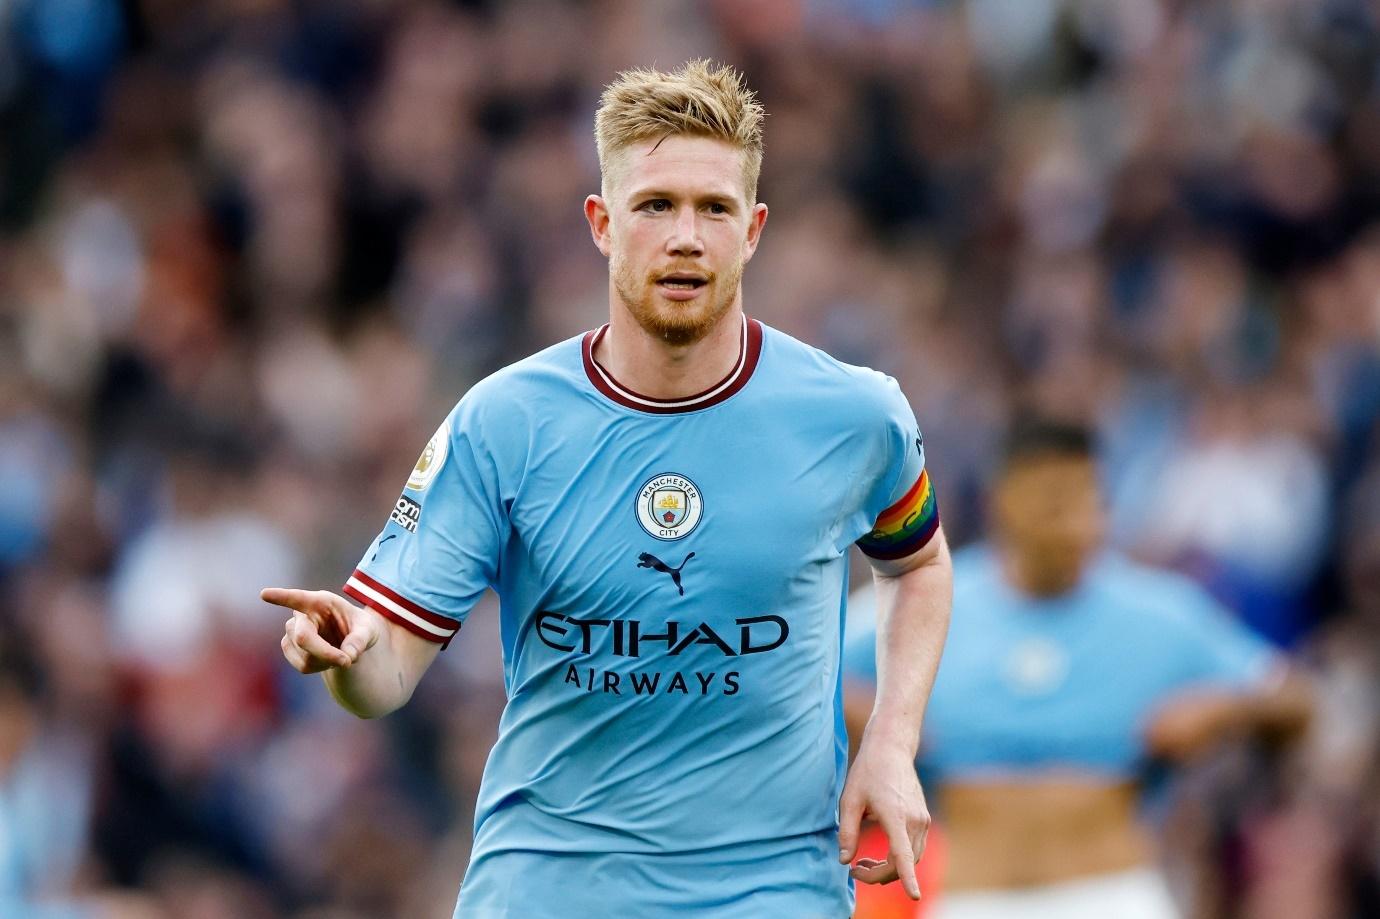 FPL Gameweek 38 Transfer Tips: Two Players to BUY - Kevin De Bruyne 